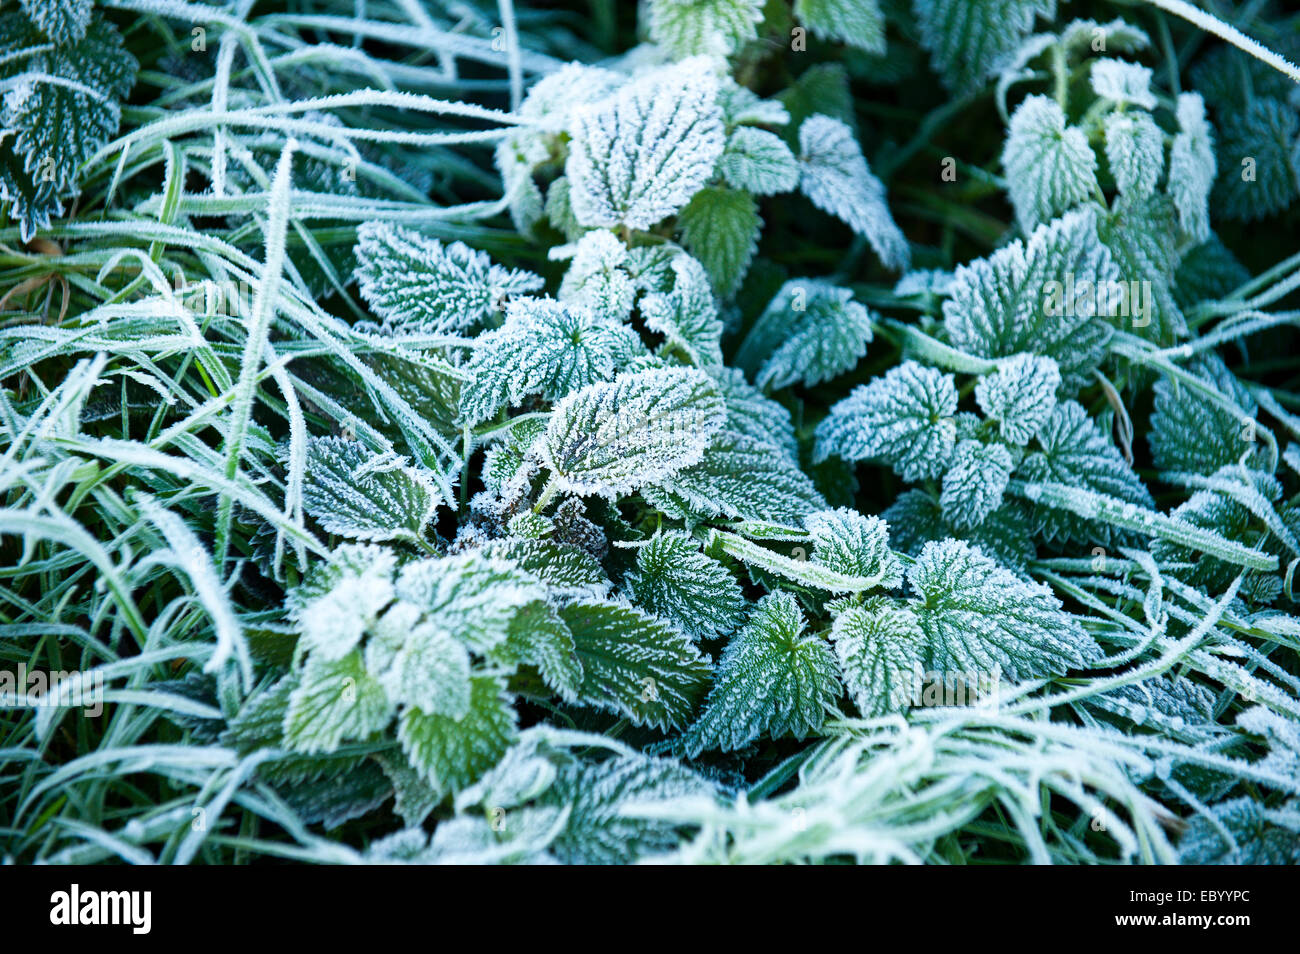 Builth Wells, Powys, UK. 6th December, 2014. Frost in Mid Wales this morning after a cold night with temperatures dropping to -2deg C. Credit:  Graham M. Lawrence/Alamy Live News. Stock Photo